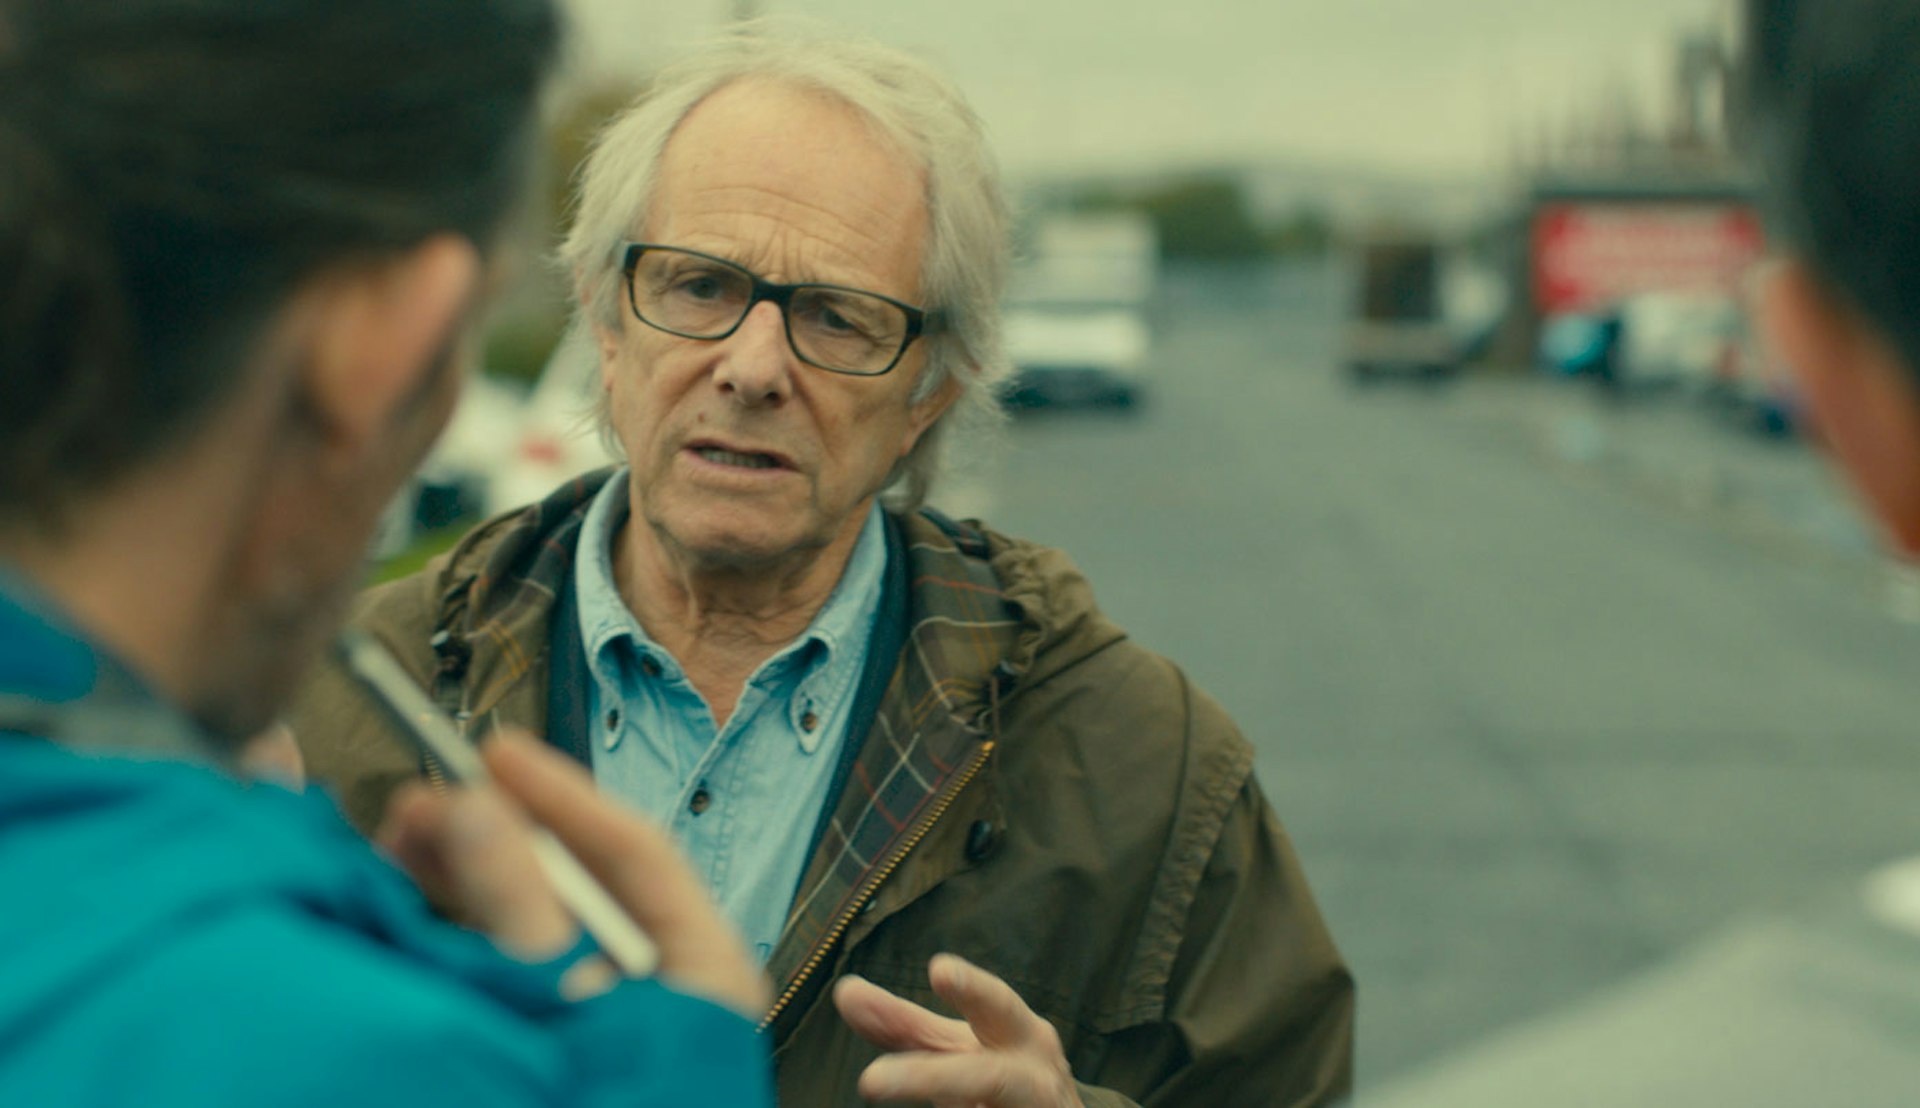 A still from Versus: The Life and Films of Ken Loach (2016) by Louise Osmond.